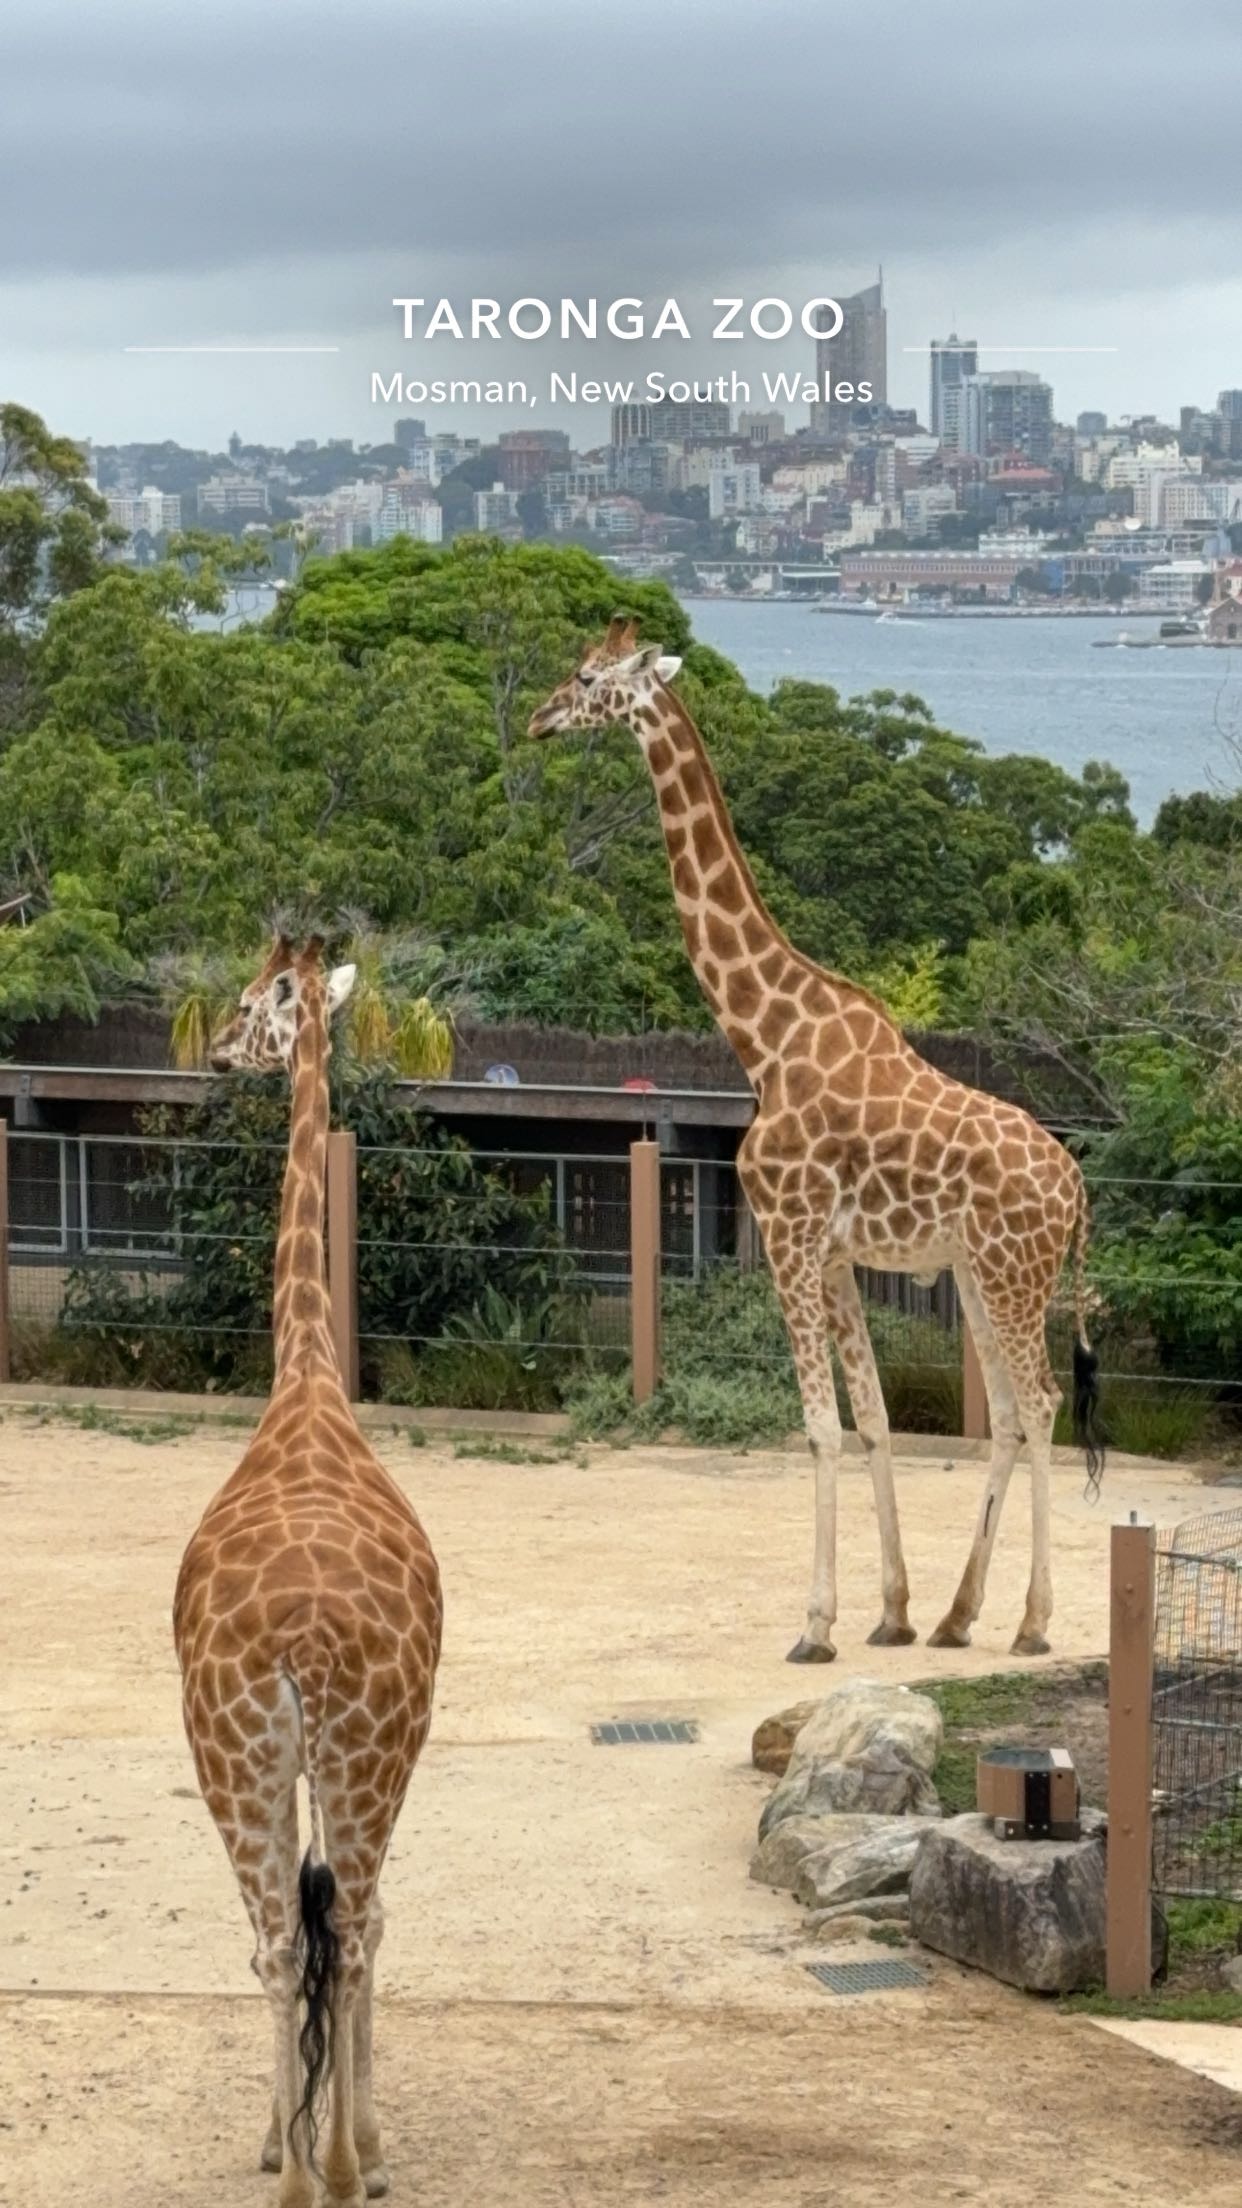 A zoo with a view!